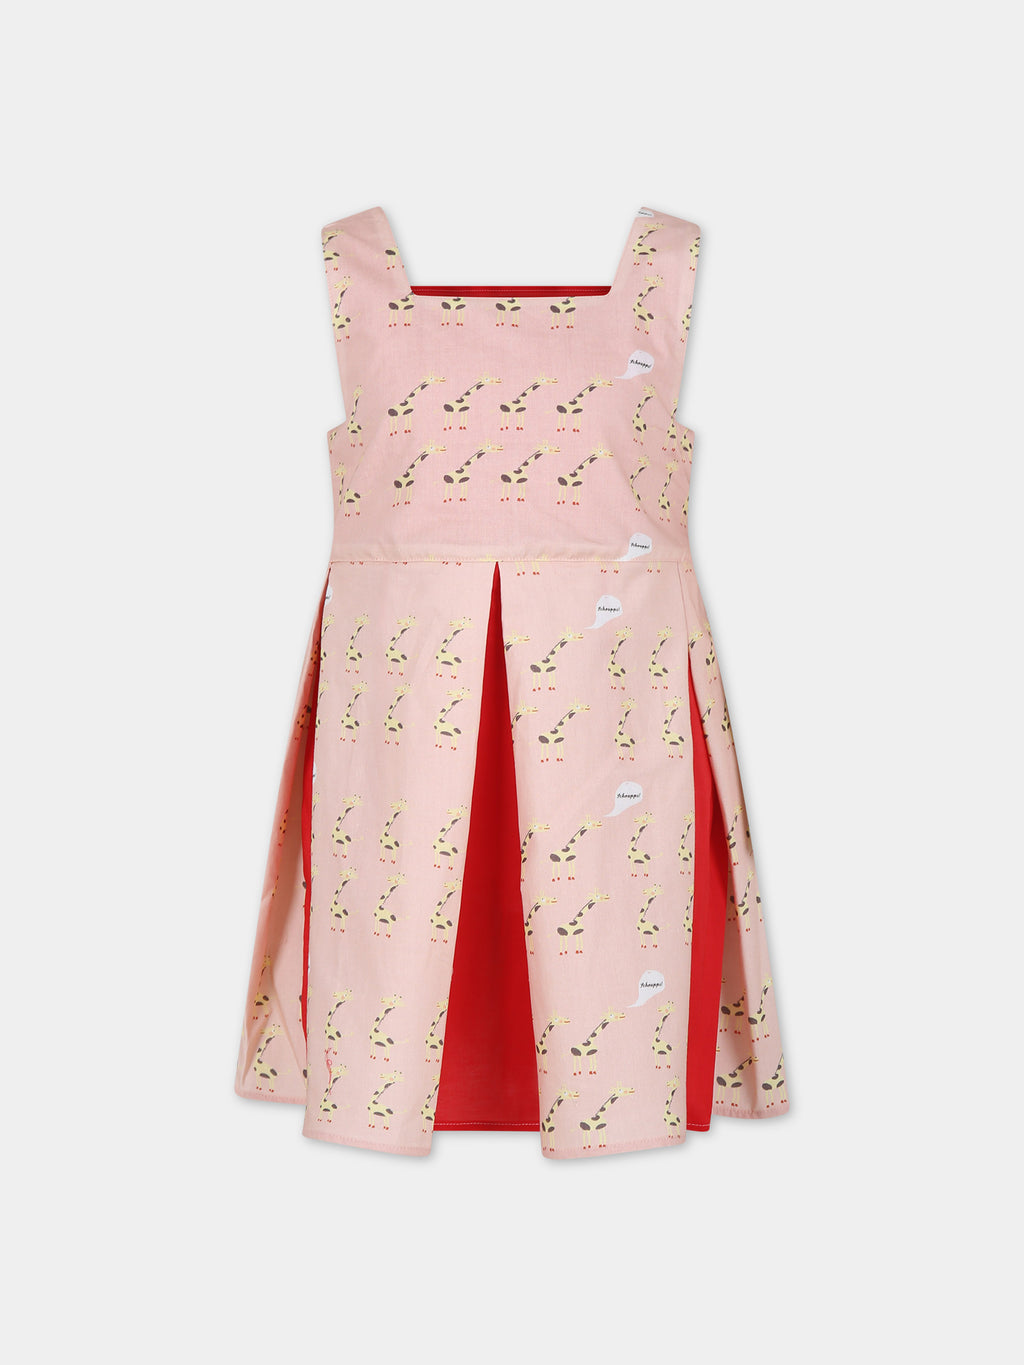 Pink dress for girl with giraffes